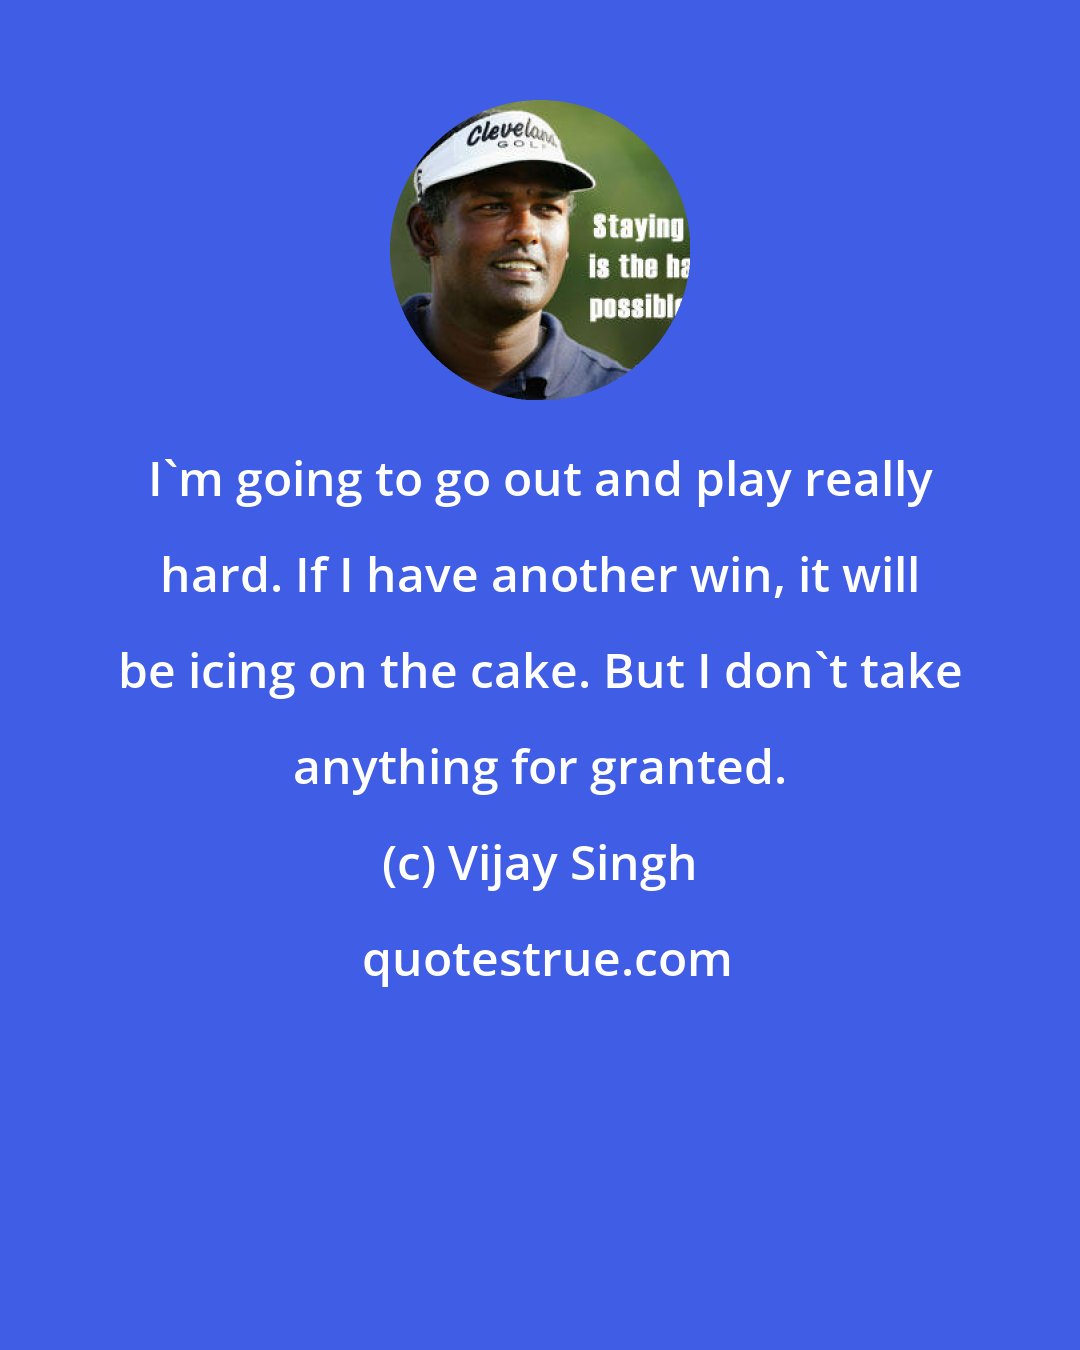 Vijay Singh: I'm going to go out and play really hard. If I have another win, it will be icing on the cake. But I don't take anything for granted.